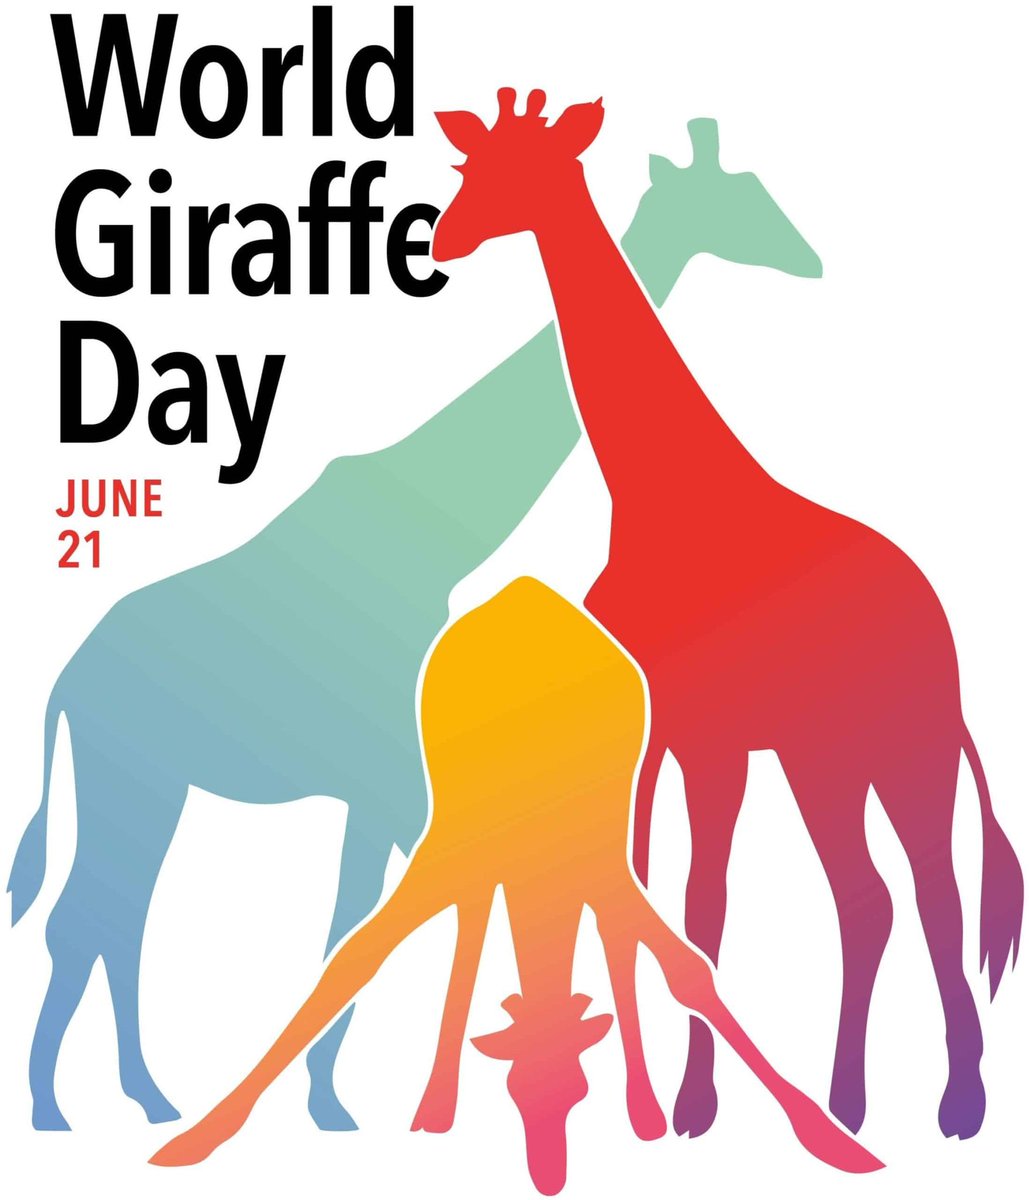 21st June is the northern hemisphere’s longest day of the year! It is therefore very appropriate that on this day we celebrate the planets longest-necked animal… the graceful giraffe!

#WorldGiraffeDay #WorldGiraffeDay2022 #giraffeday #giraffeday2022 #giraffeconservation #RAUK